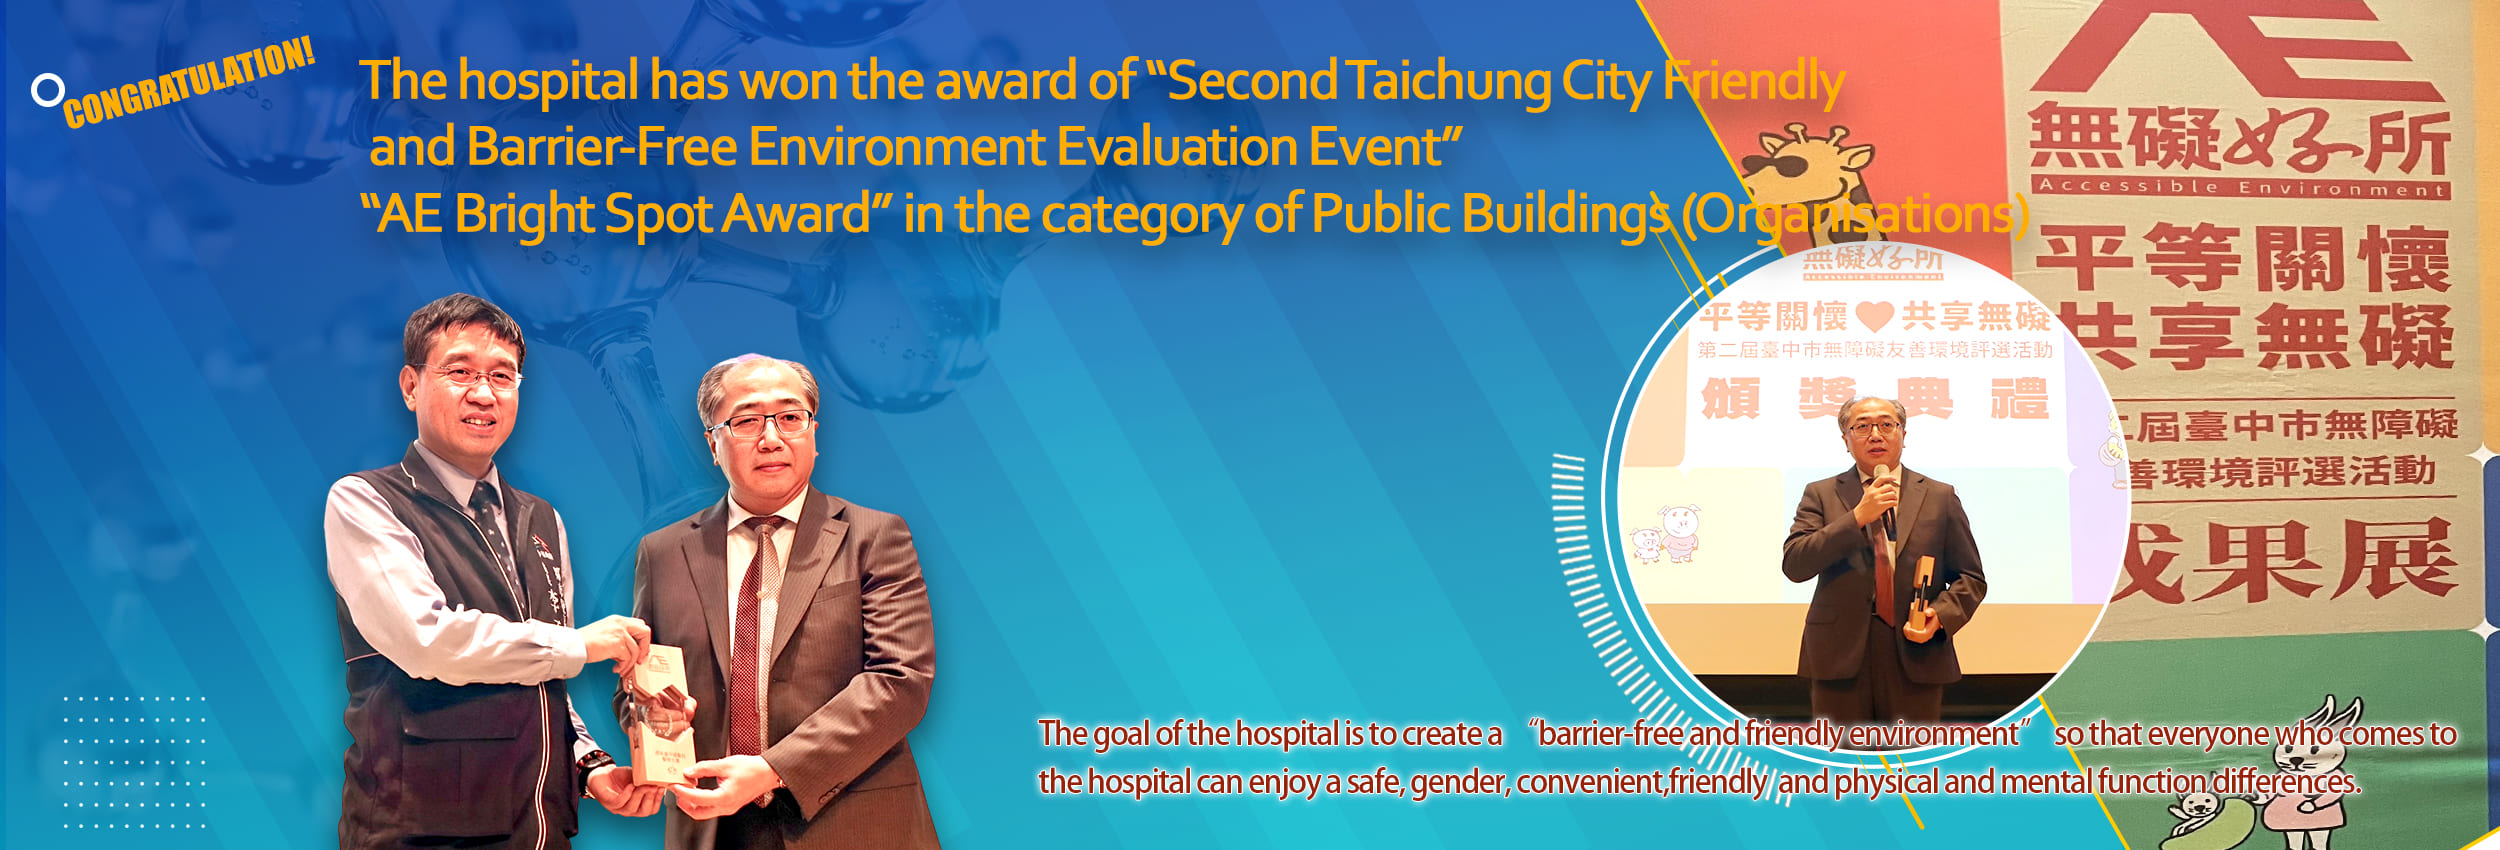 The hospital has won the award of “Second Taichung City Friendly and Barrier-Free Environment Evaluation Event”